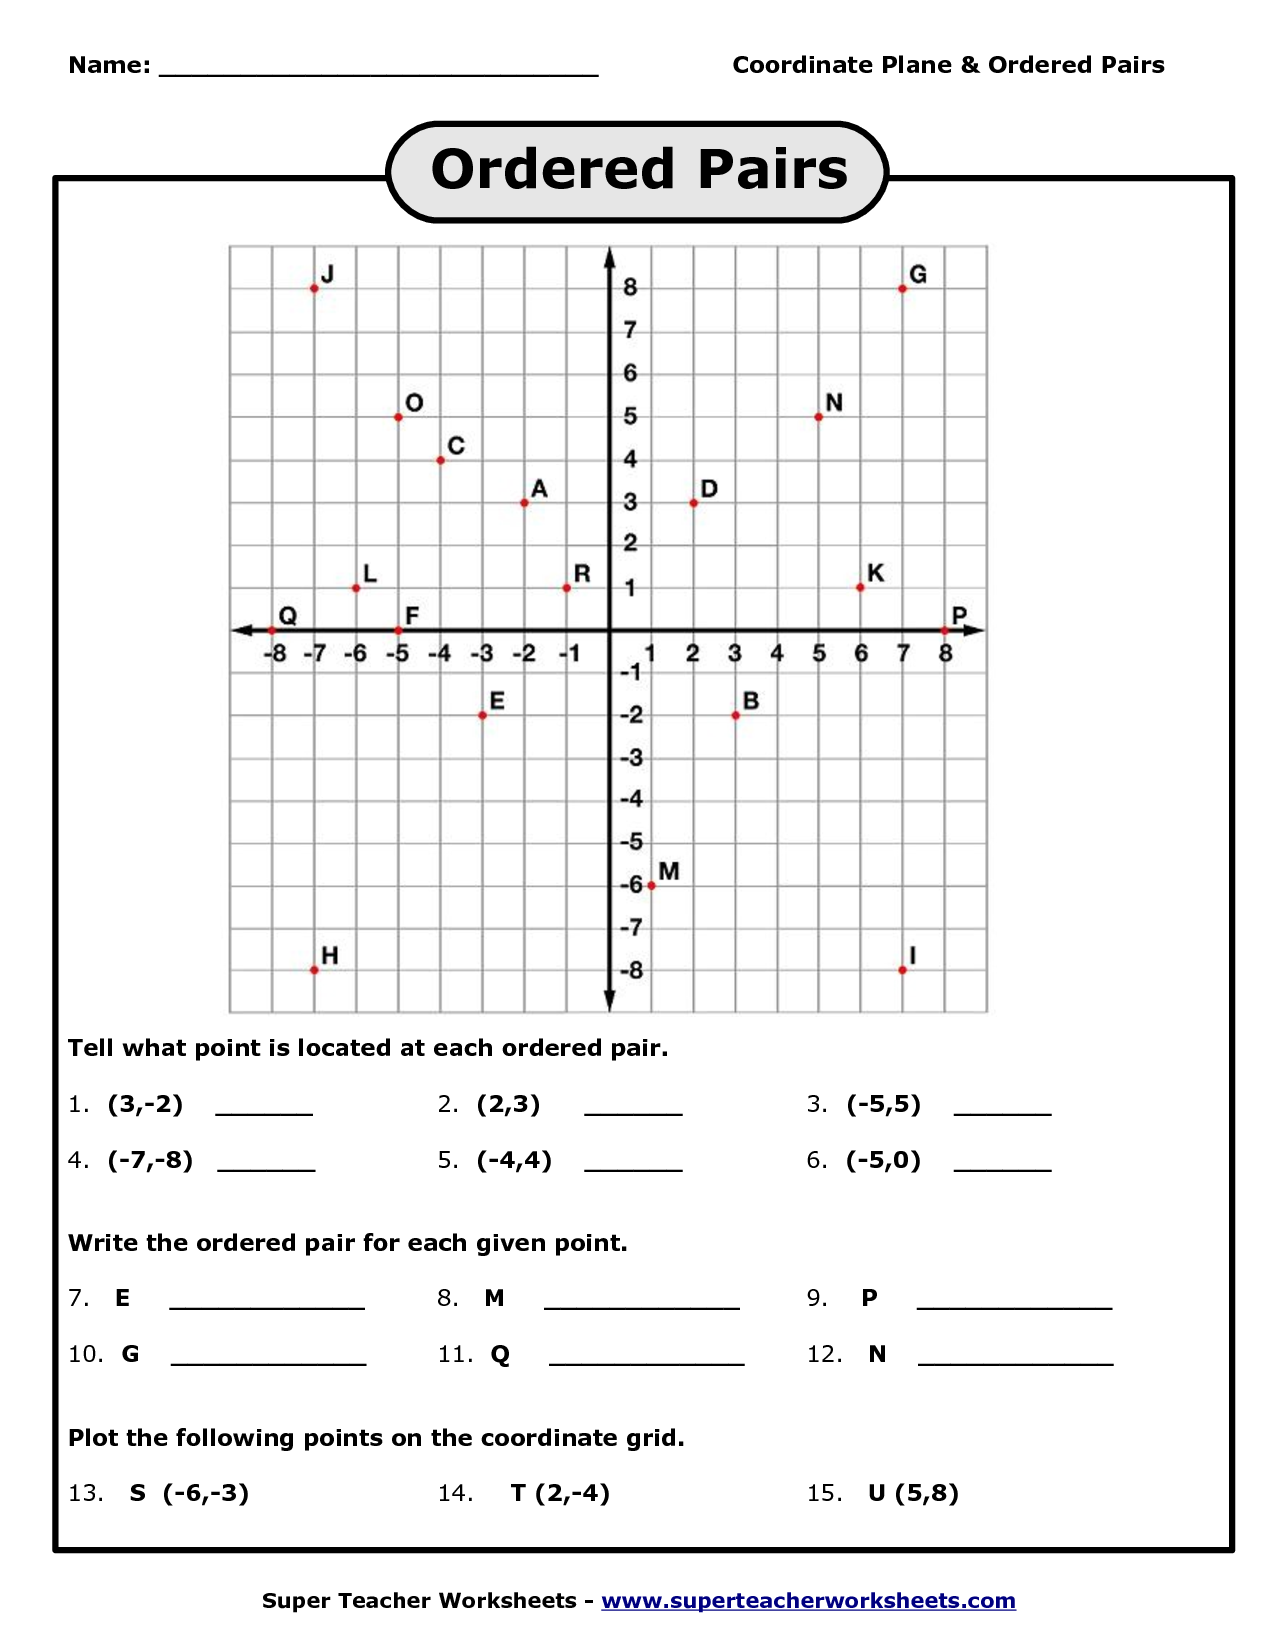 Graphing Points On Coordinate Plane Worksheet Image